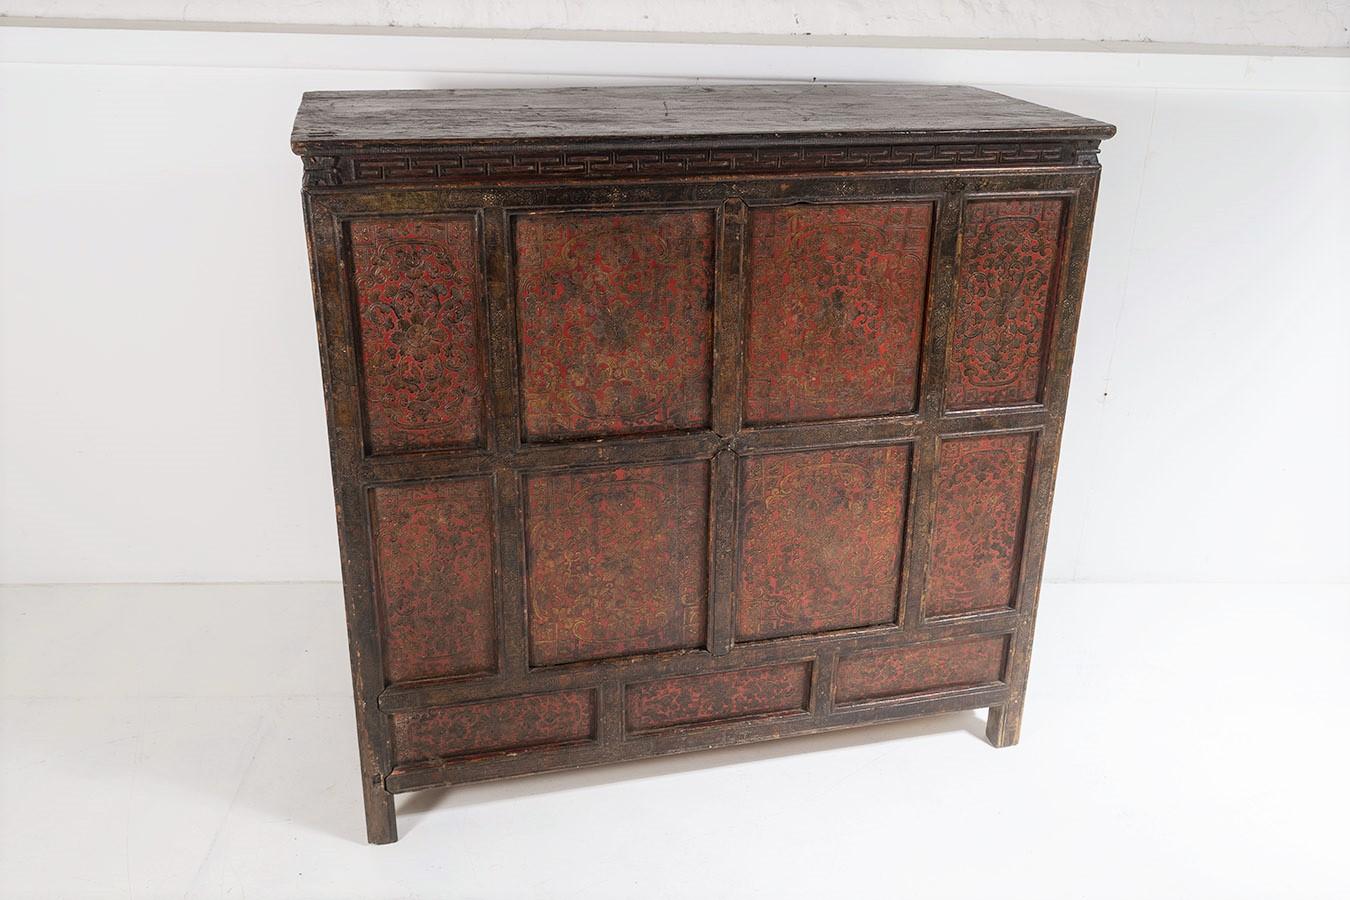 Tibétain Original 19thC Large Chinese Tibetan Hand Painted Lacquered Cupboard Sideboard en vente